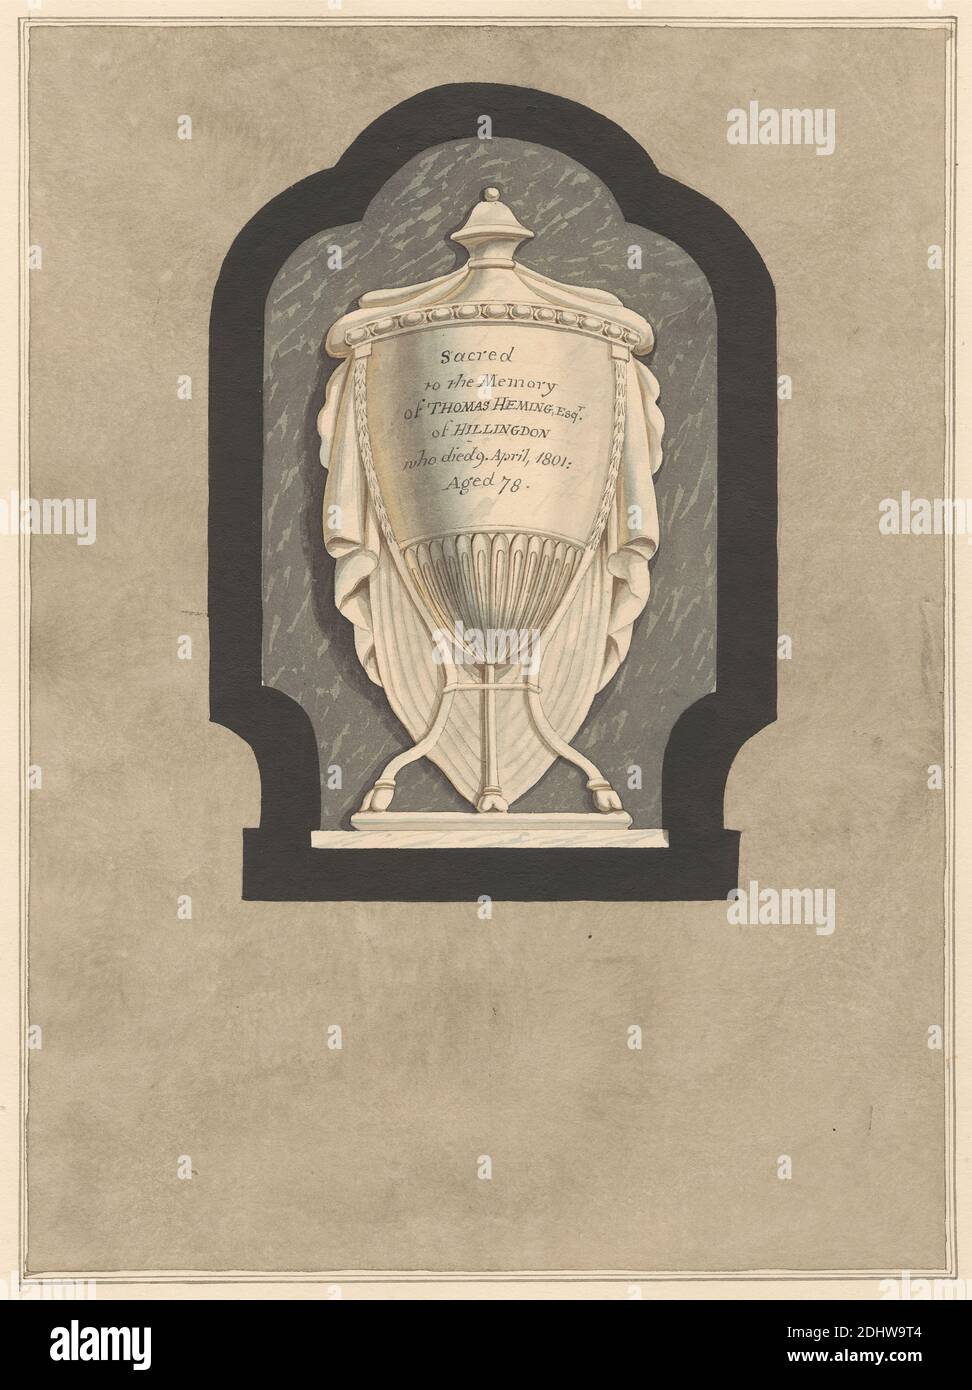 Memorial to Thomas Heming from Hillingdon Church, Daniel Lysons, 1762–1834, British, between 1796 and 1811, Pen and black ink and watercolor over graphite on medium, slightly textured, cream wove paper, Sheet: 14 3/4 × 10 3/4 inches (37.5 × 27.3 cm), architectural subject, church, memorial, Church of St John the Baptist, England, Greater London, Hillingdon, London, United Kingdom Stock Photo